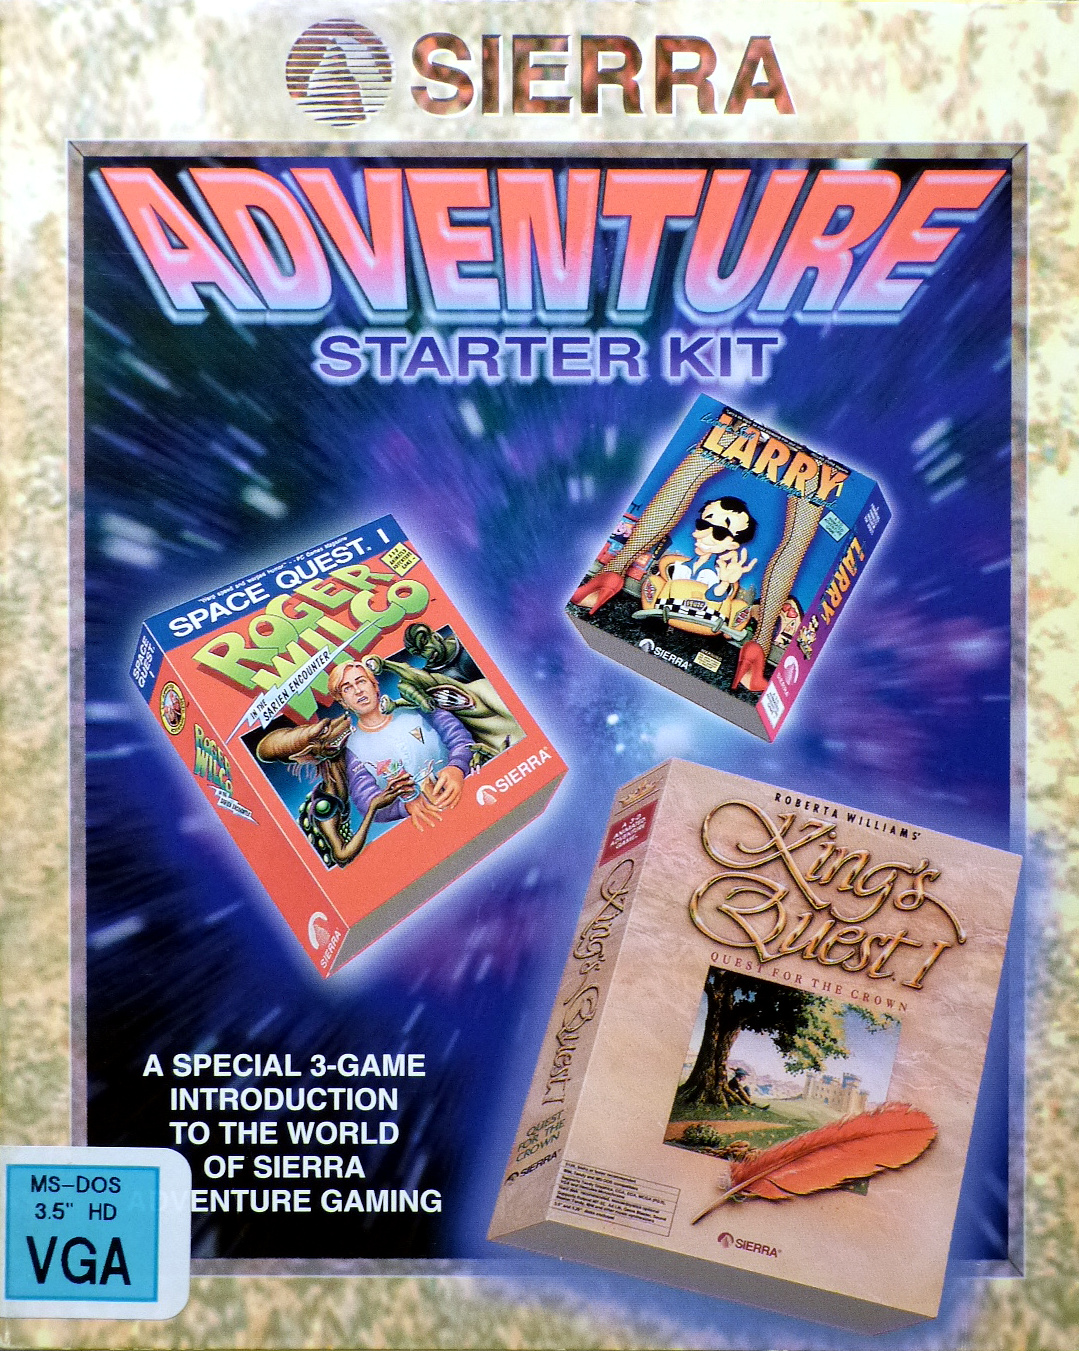 Sierra Adventure Starter Kit: Leisure Suit Larry in the Land of the Lounge Lizards, Space Quest I: The Sarien Encounter, King's Quest I: Quest for the Crown